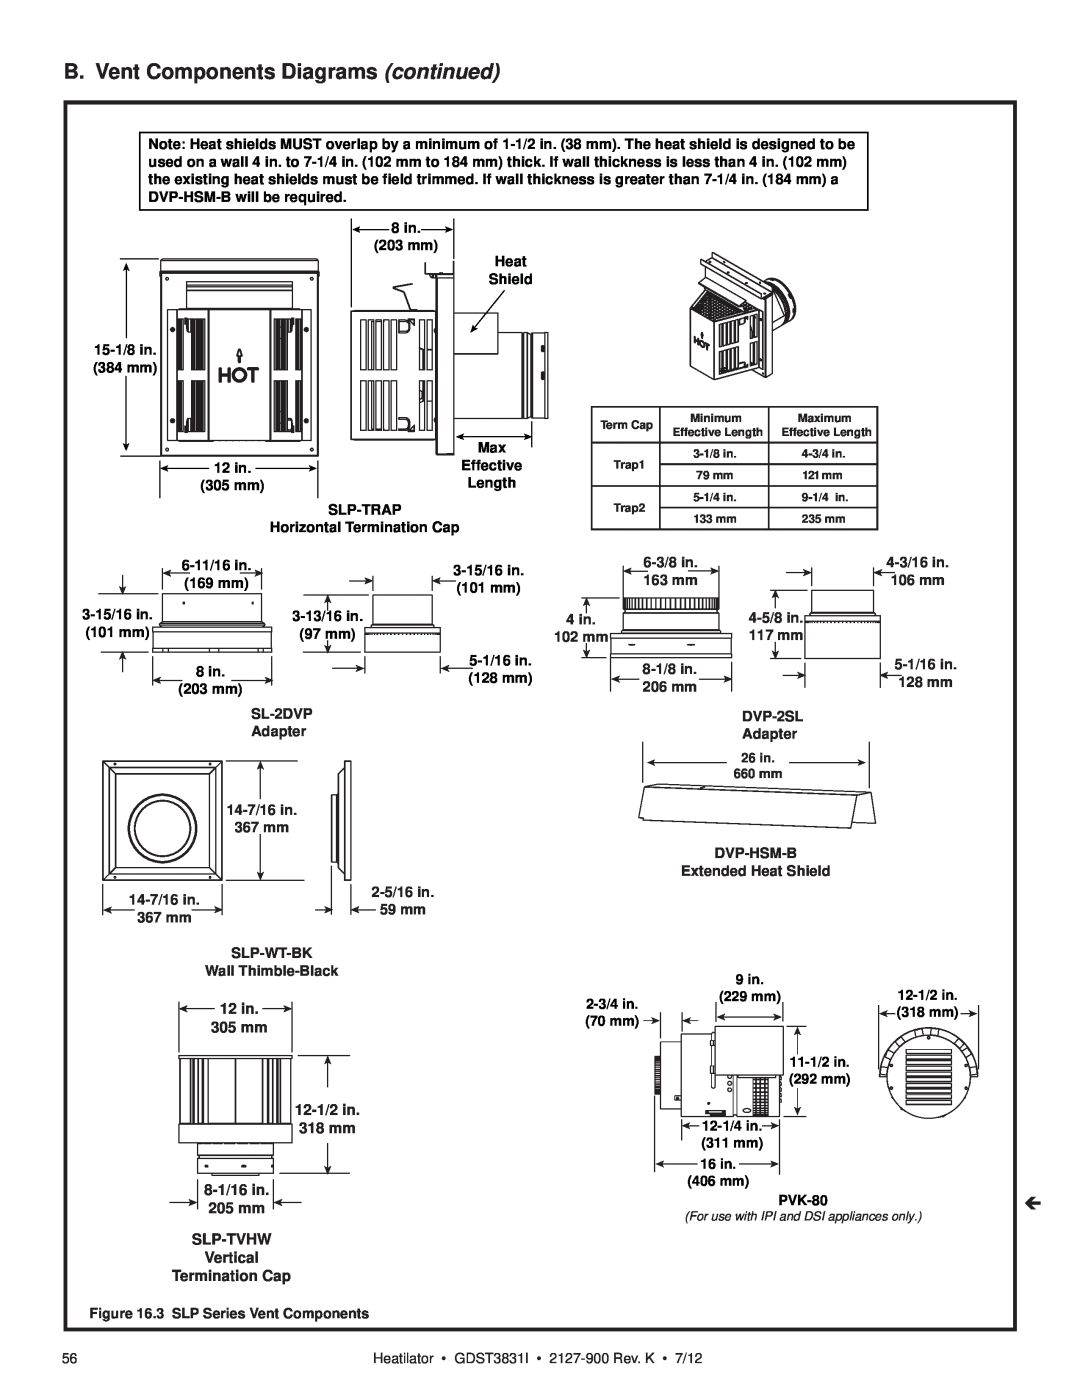 Heatiator GDST3831I B. Vent Components Diagrams continued, 12 in. 305 mm, SL-2DVP Adapter 14-7/16in 367 mm, 2-5/16in, 4 in 